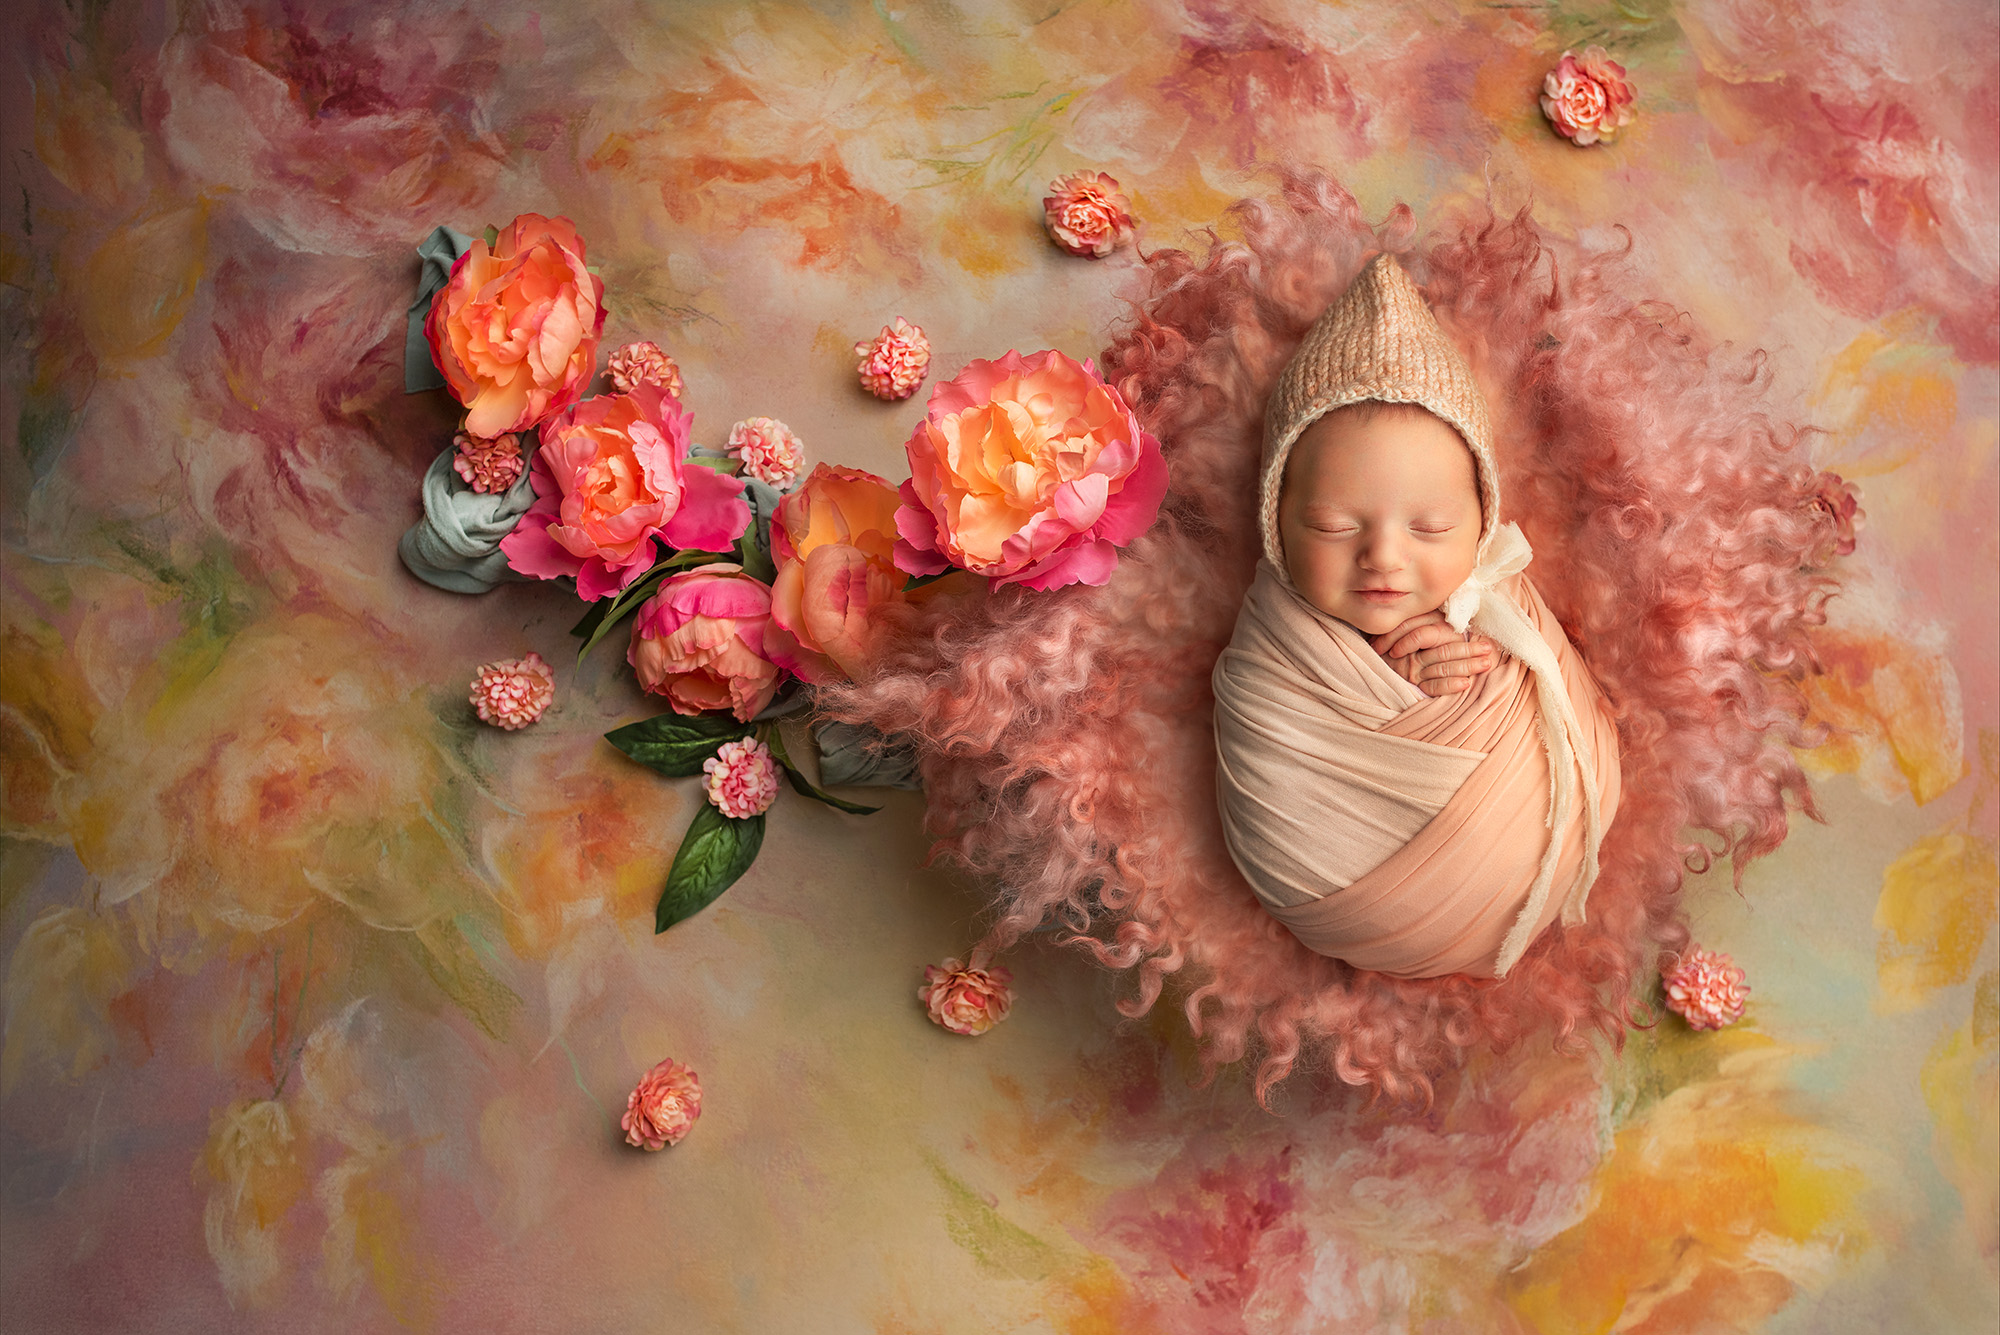 Adorable smiling newborn wearing a bonnet, wrapped in warmth on a vintage rose backdrop of oranges, pinks, and yellows.